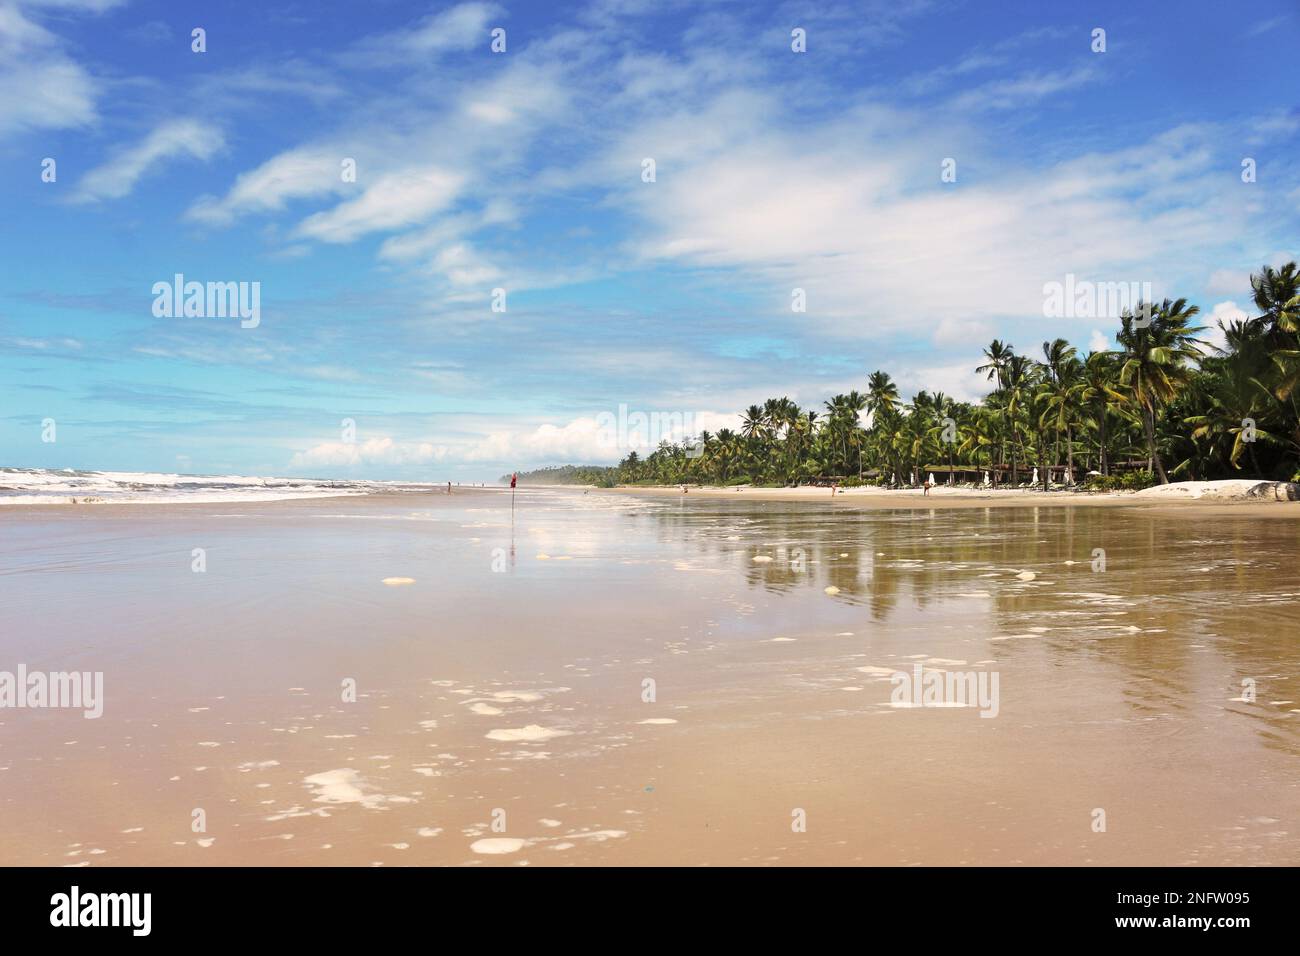 The beautiful beach of Itacarezinho in the Municipality of Itacaré, south of the state of Bahia, Northeast Brazil. Stock Photo